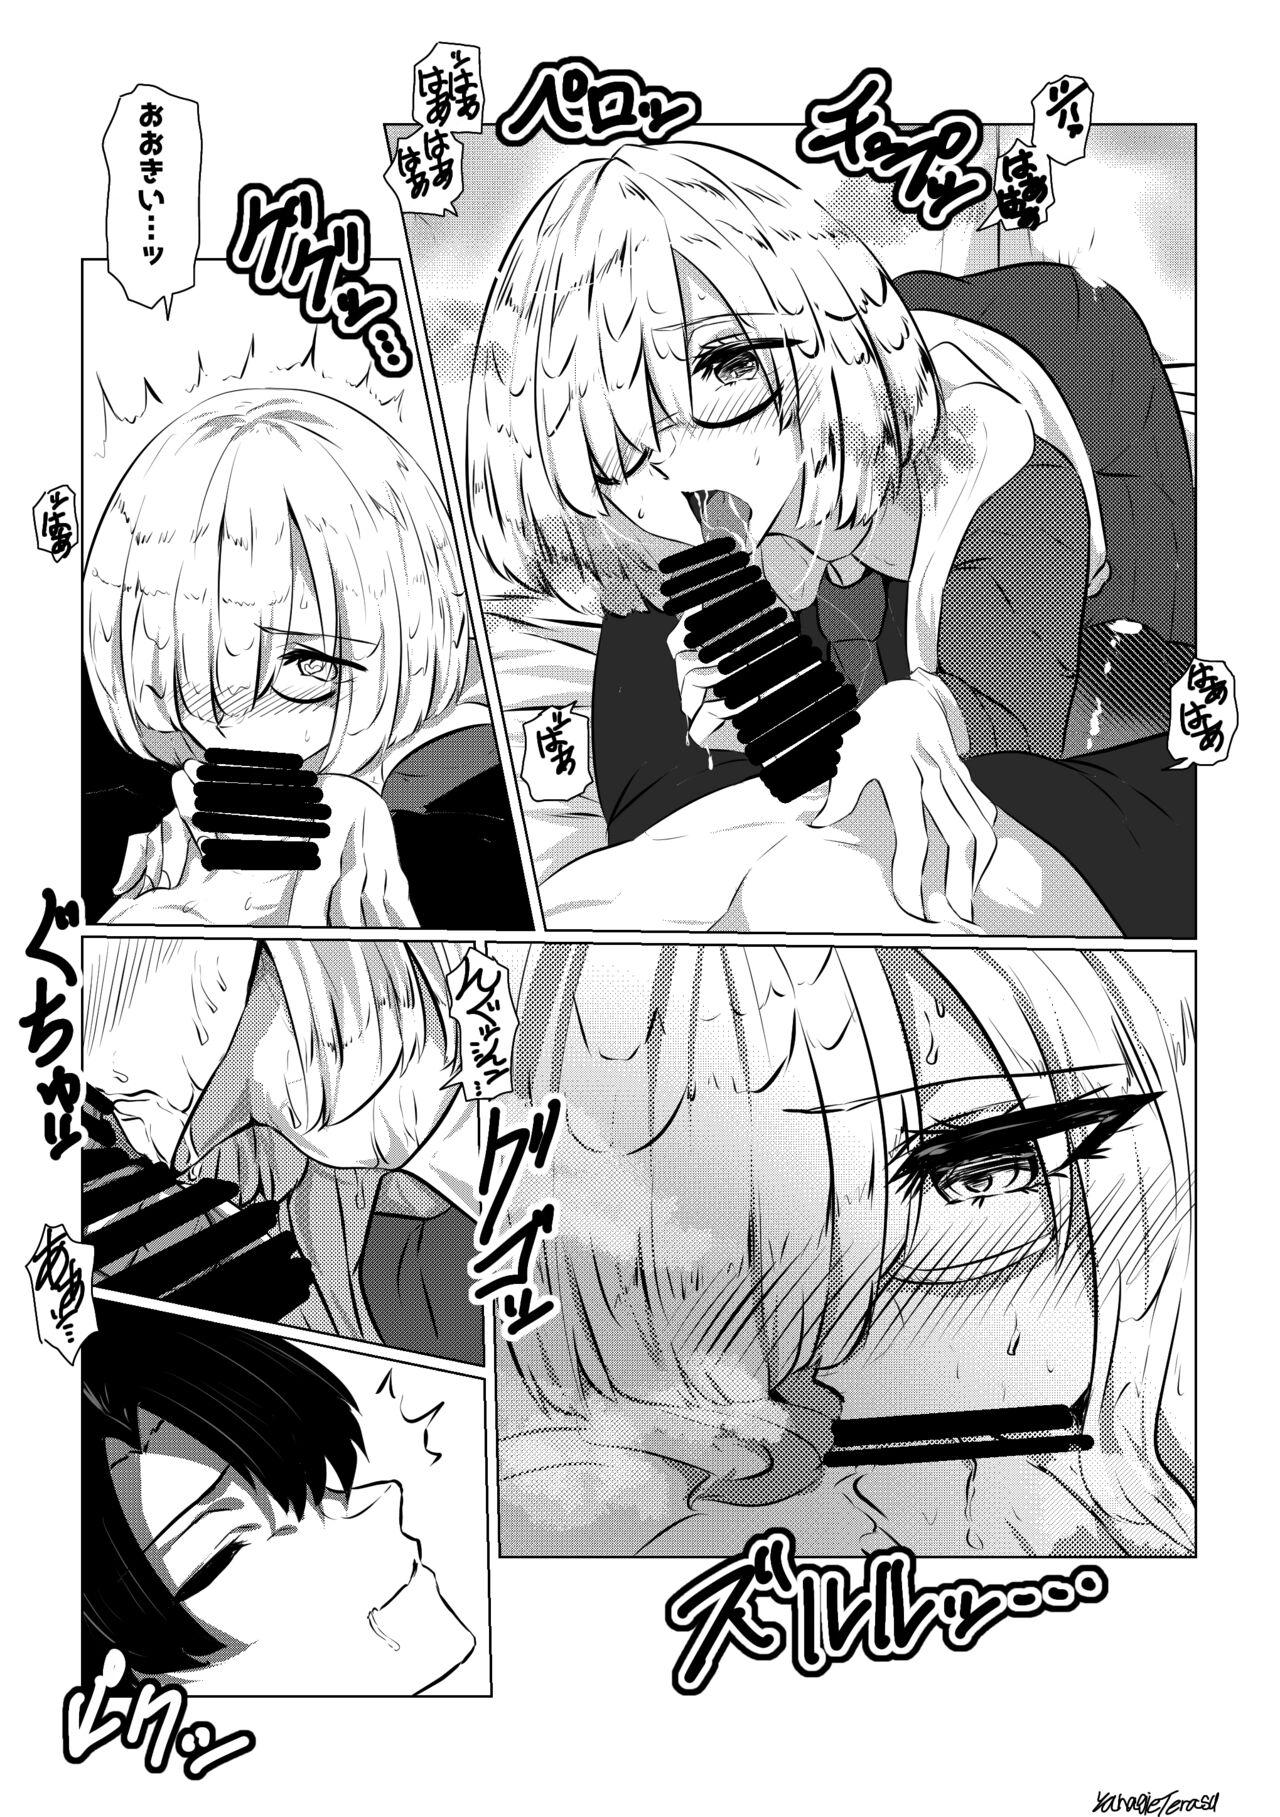 Passionate マシュの早朝ご奉仕 - Fate grand order Amatuer Porn - Page 2